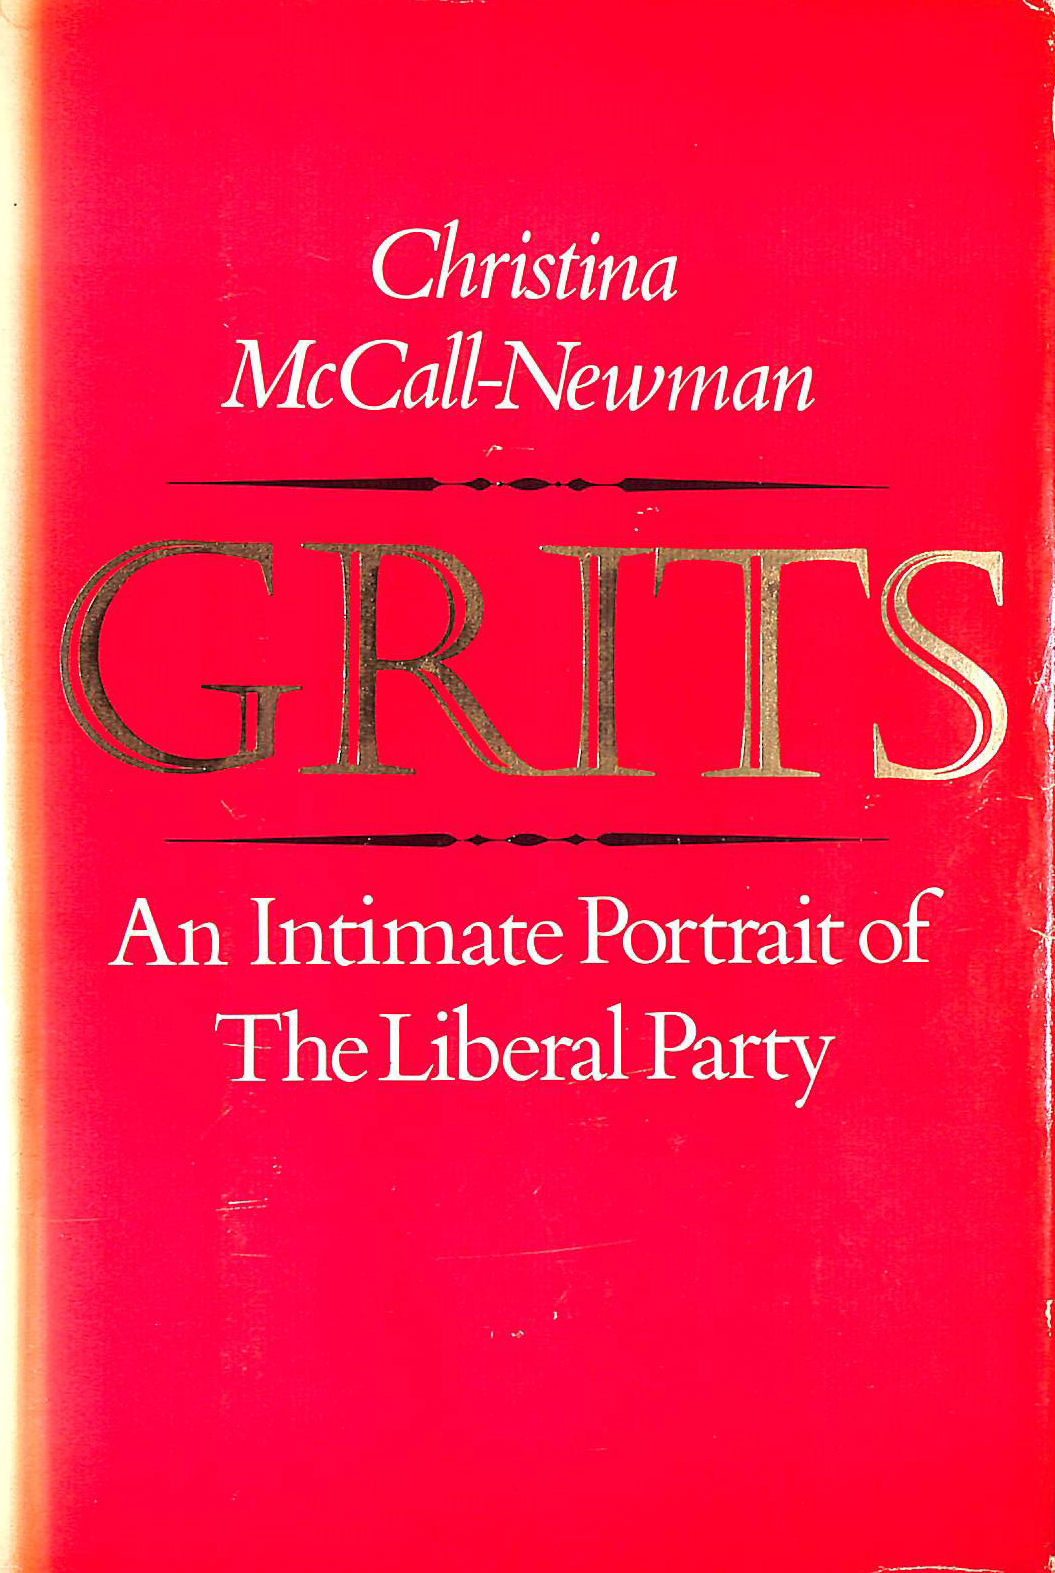 CHRISTINA MCCALL-NEWMAN - Grits: An intimate portrait of the Liberal Party